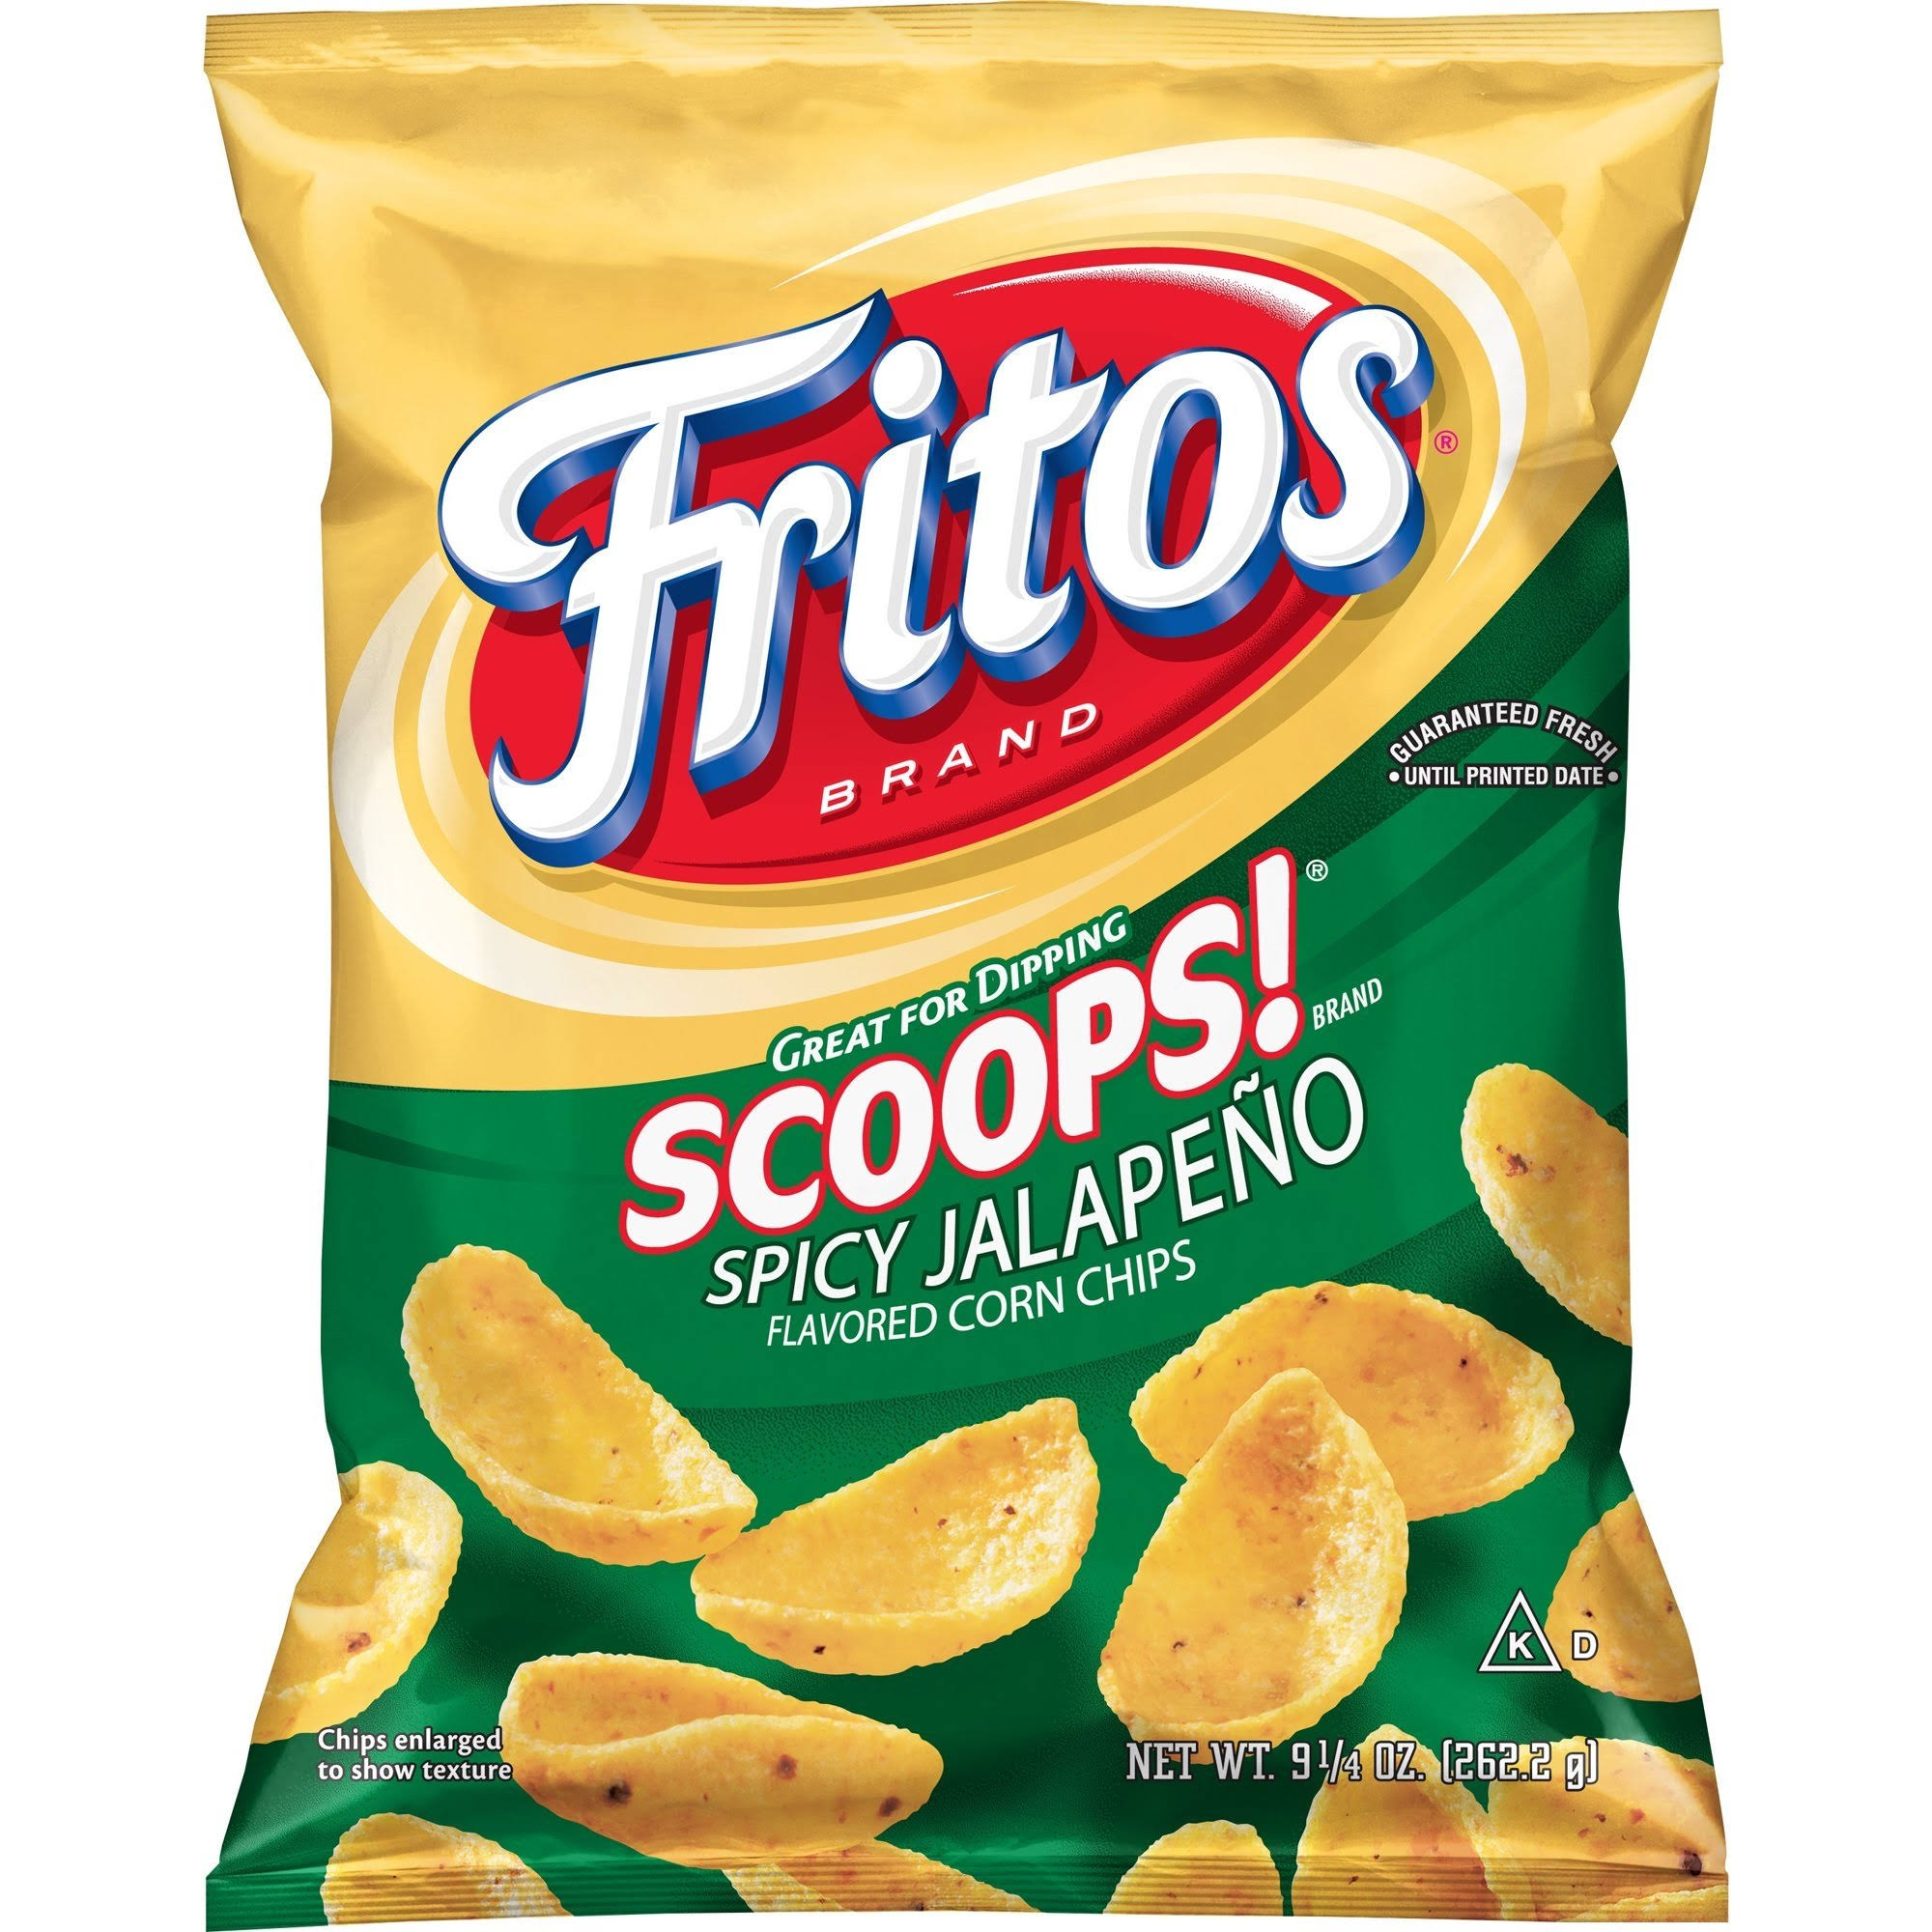 Fritos Scoops! Corn Chips - Spicy Jalapeño Flavored, 9 1/4 oz